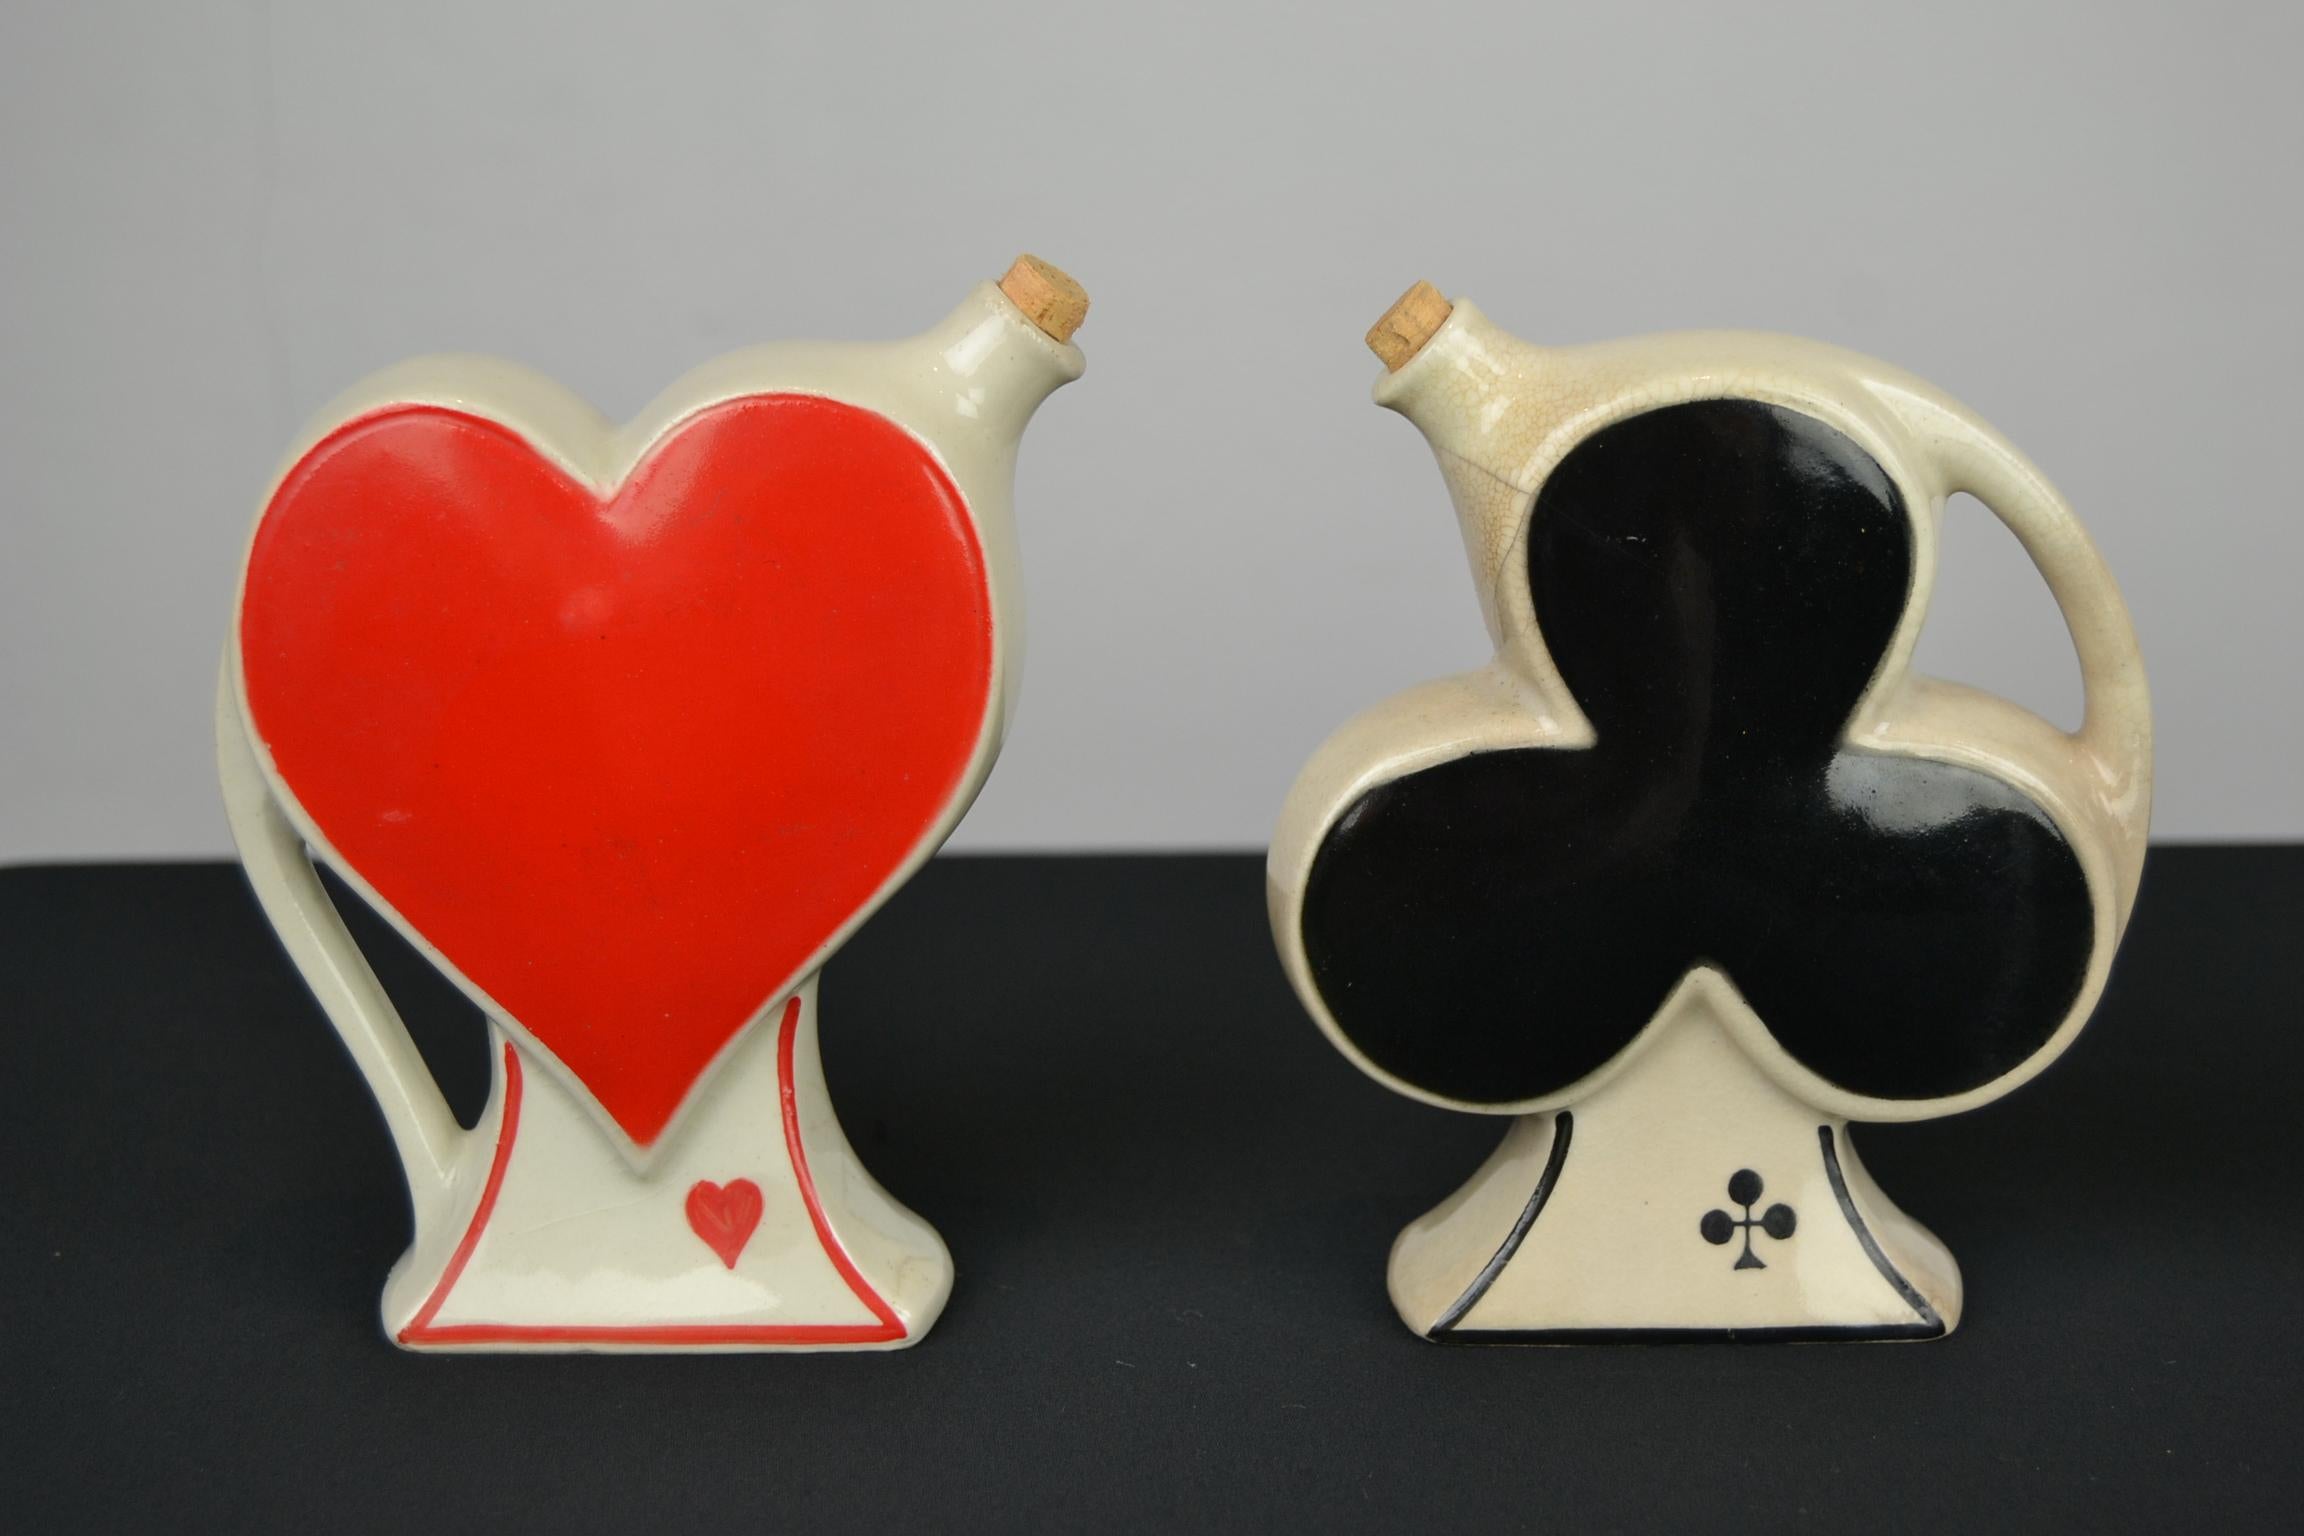 1950s set of 4 liquor bottles in the shape of the red and black playing card symbols or pips: clubs, diamonds, hearts and spades. This porcelain revol bottles were made for the Distillerie Benoit Serres Toulouse France in 1952. Each ceramic decanter